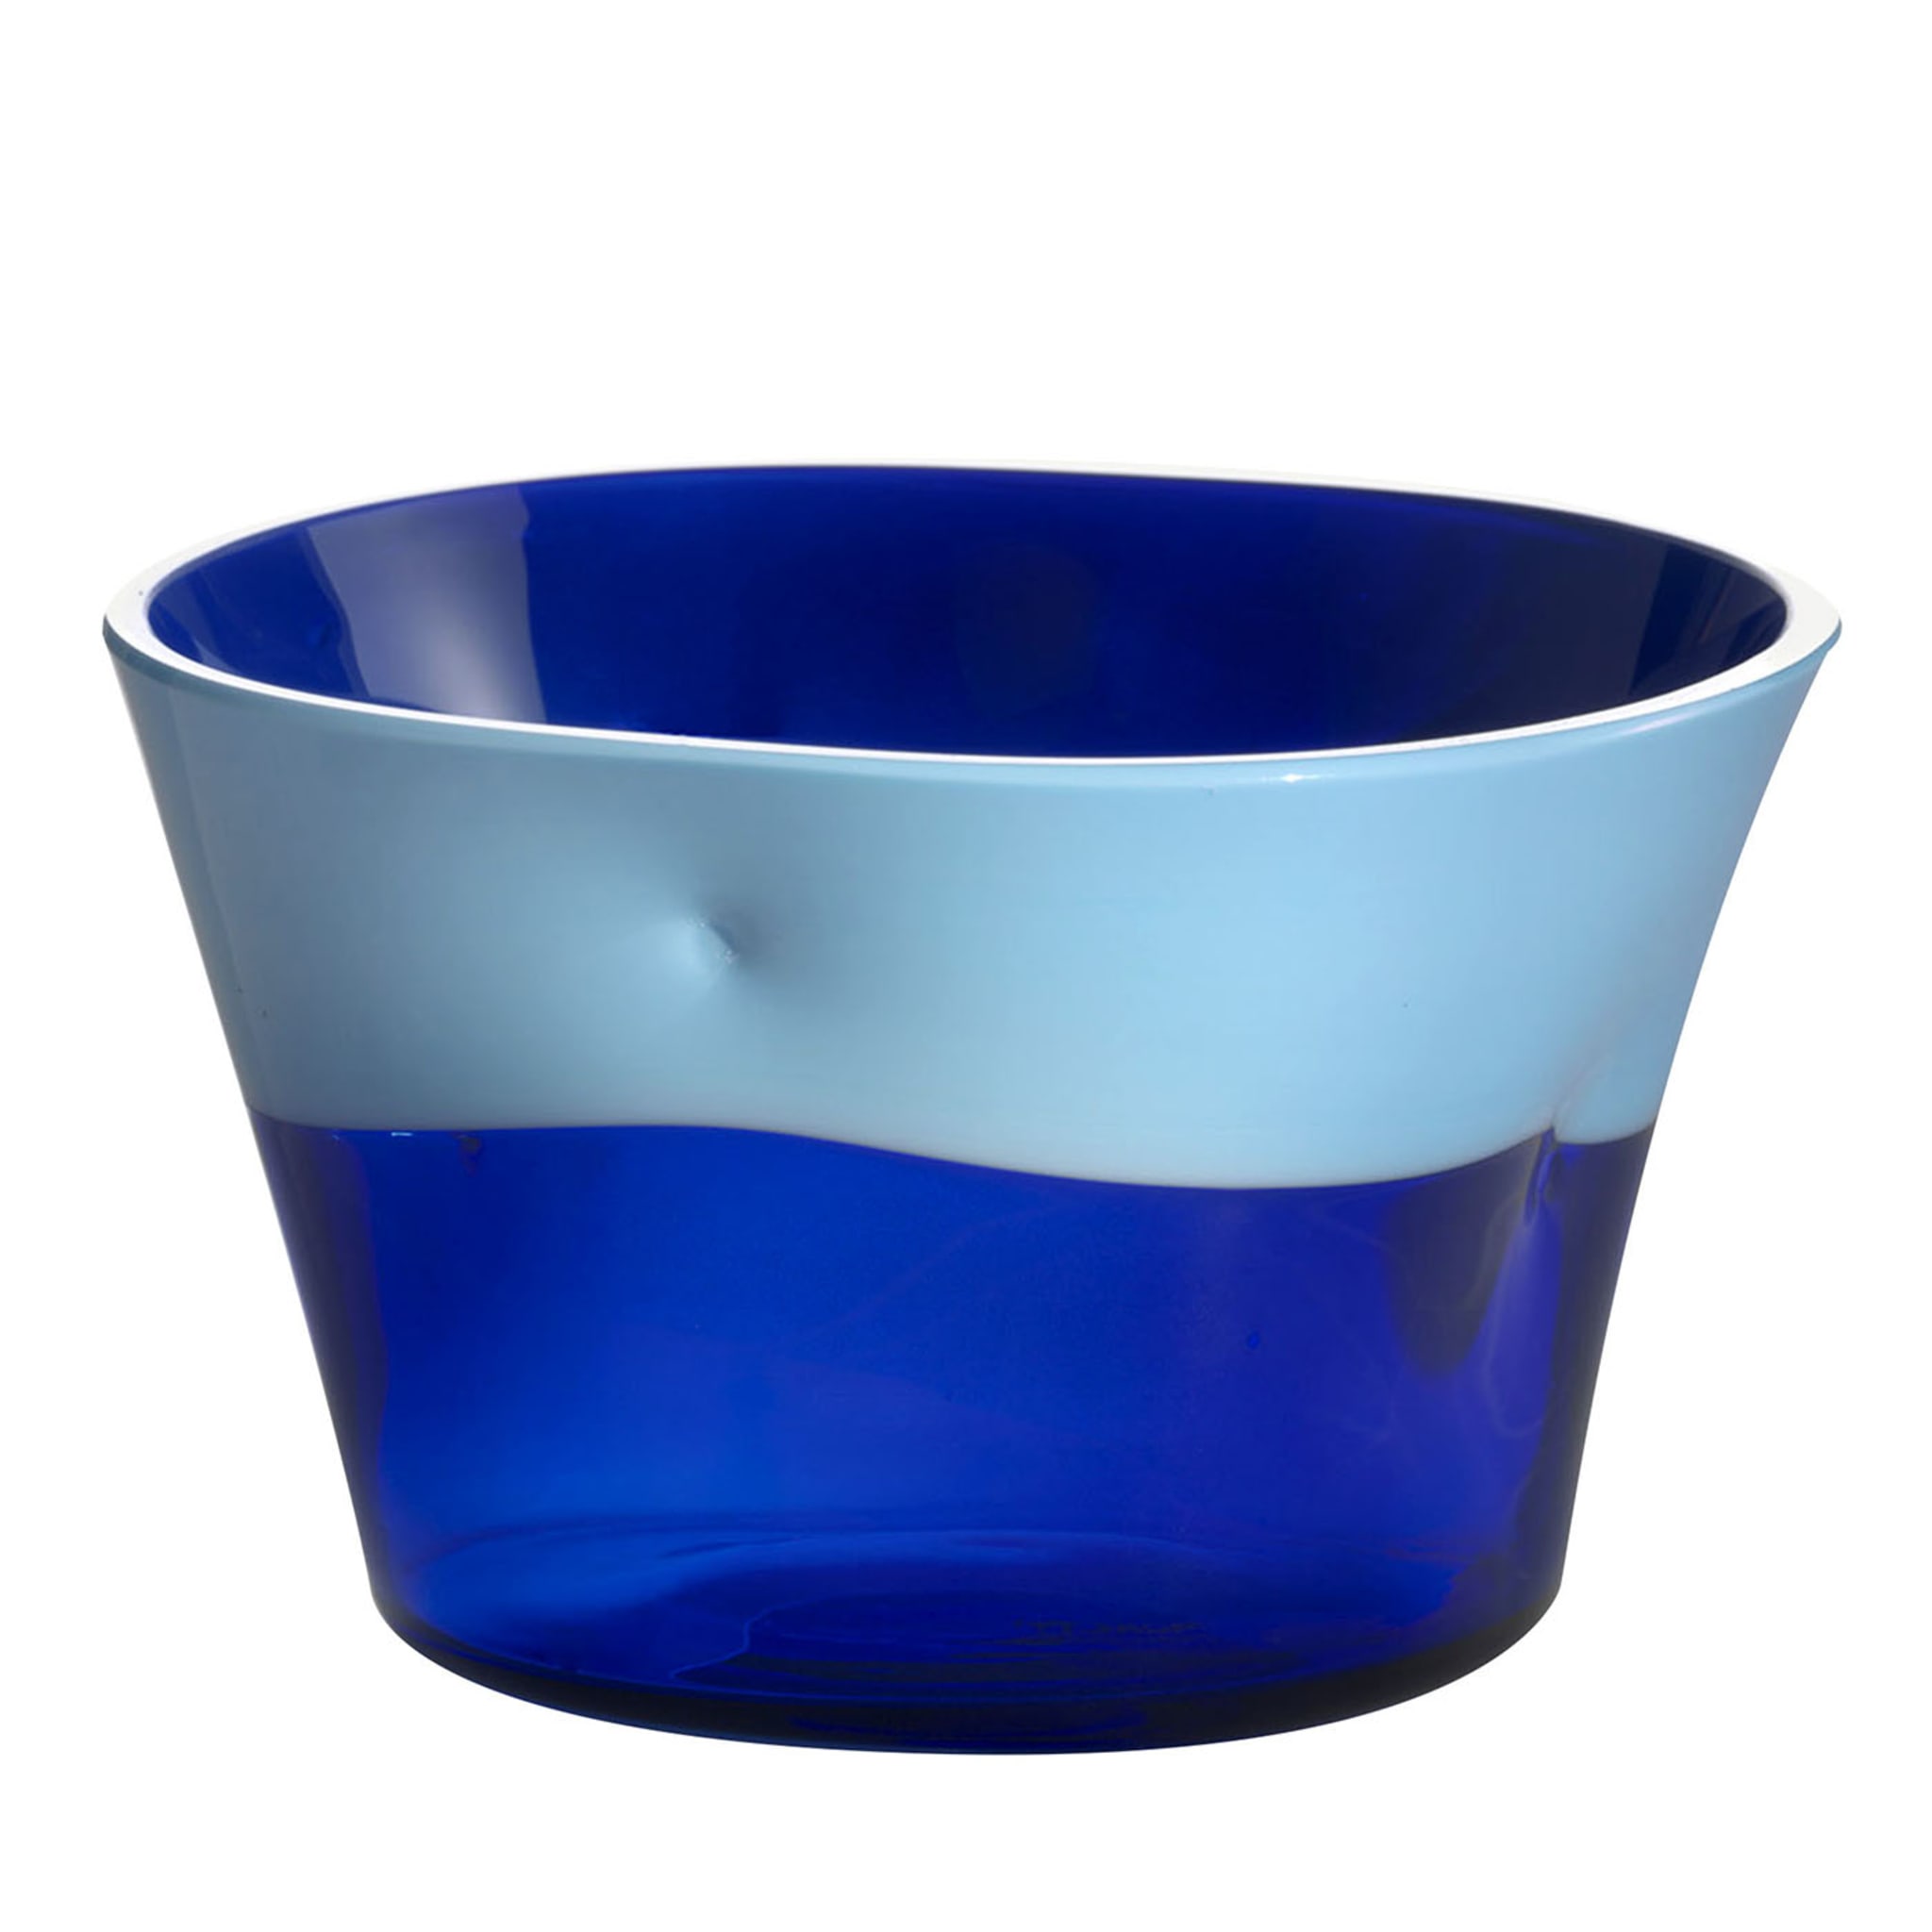 Dandy Small Light-Blue & Blue Bowl by Stefano Marcato - Main view